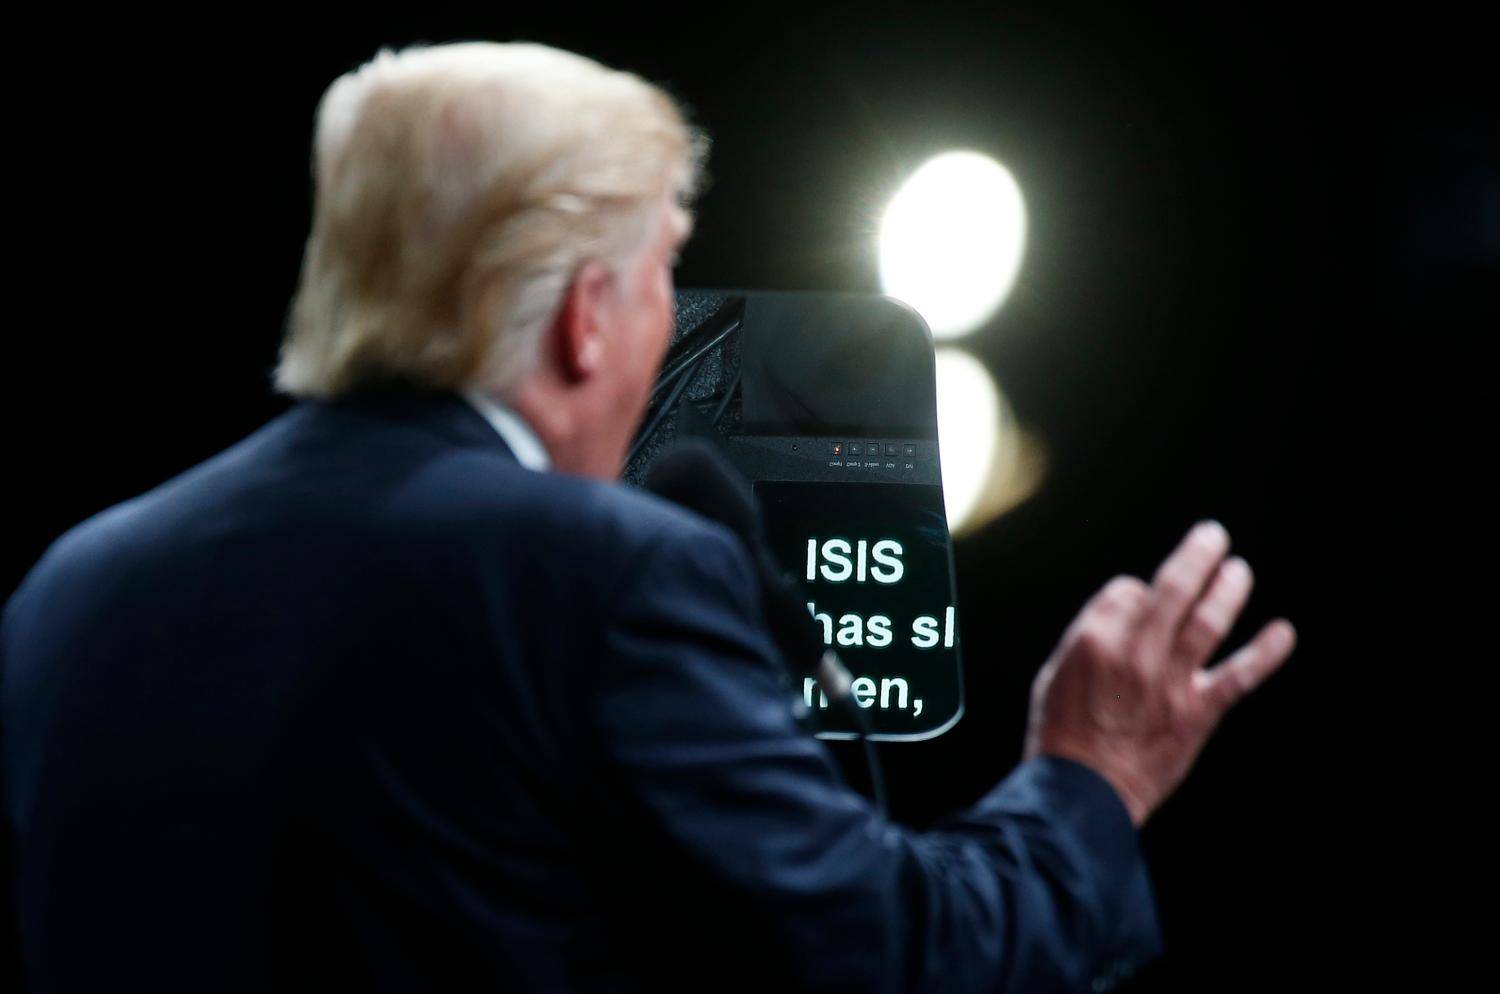 The word Isis is pictured on a teleprompter as Republican presidential nominee Donald Trump speaks at a campaign event in Selma, North Carolina, U.S. November 3, 2016. REUTERS/Carlo Allegr